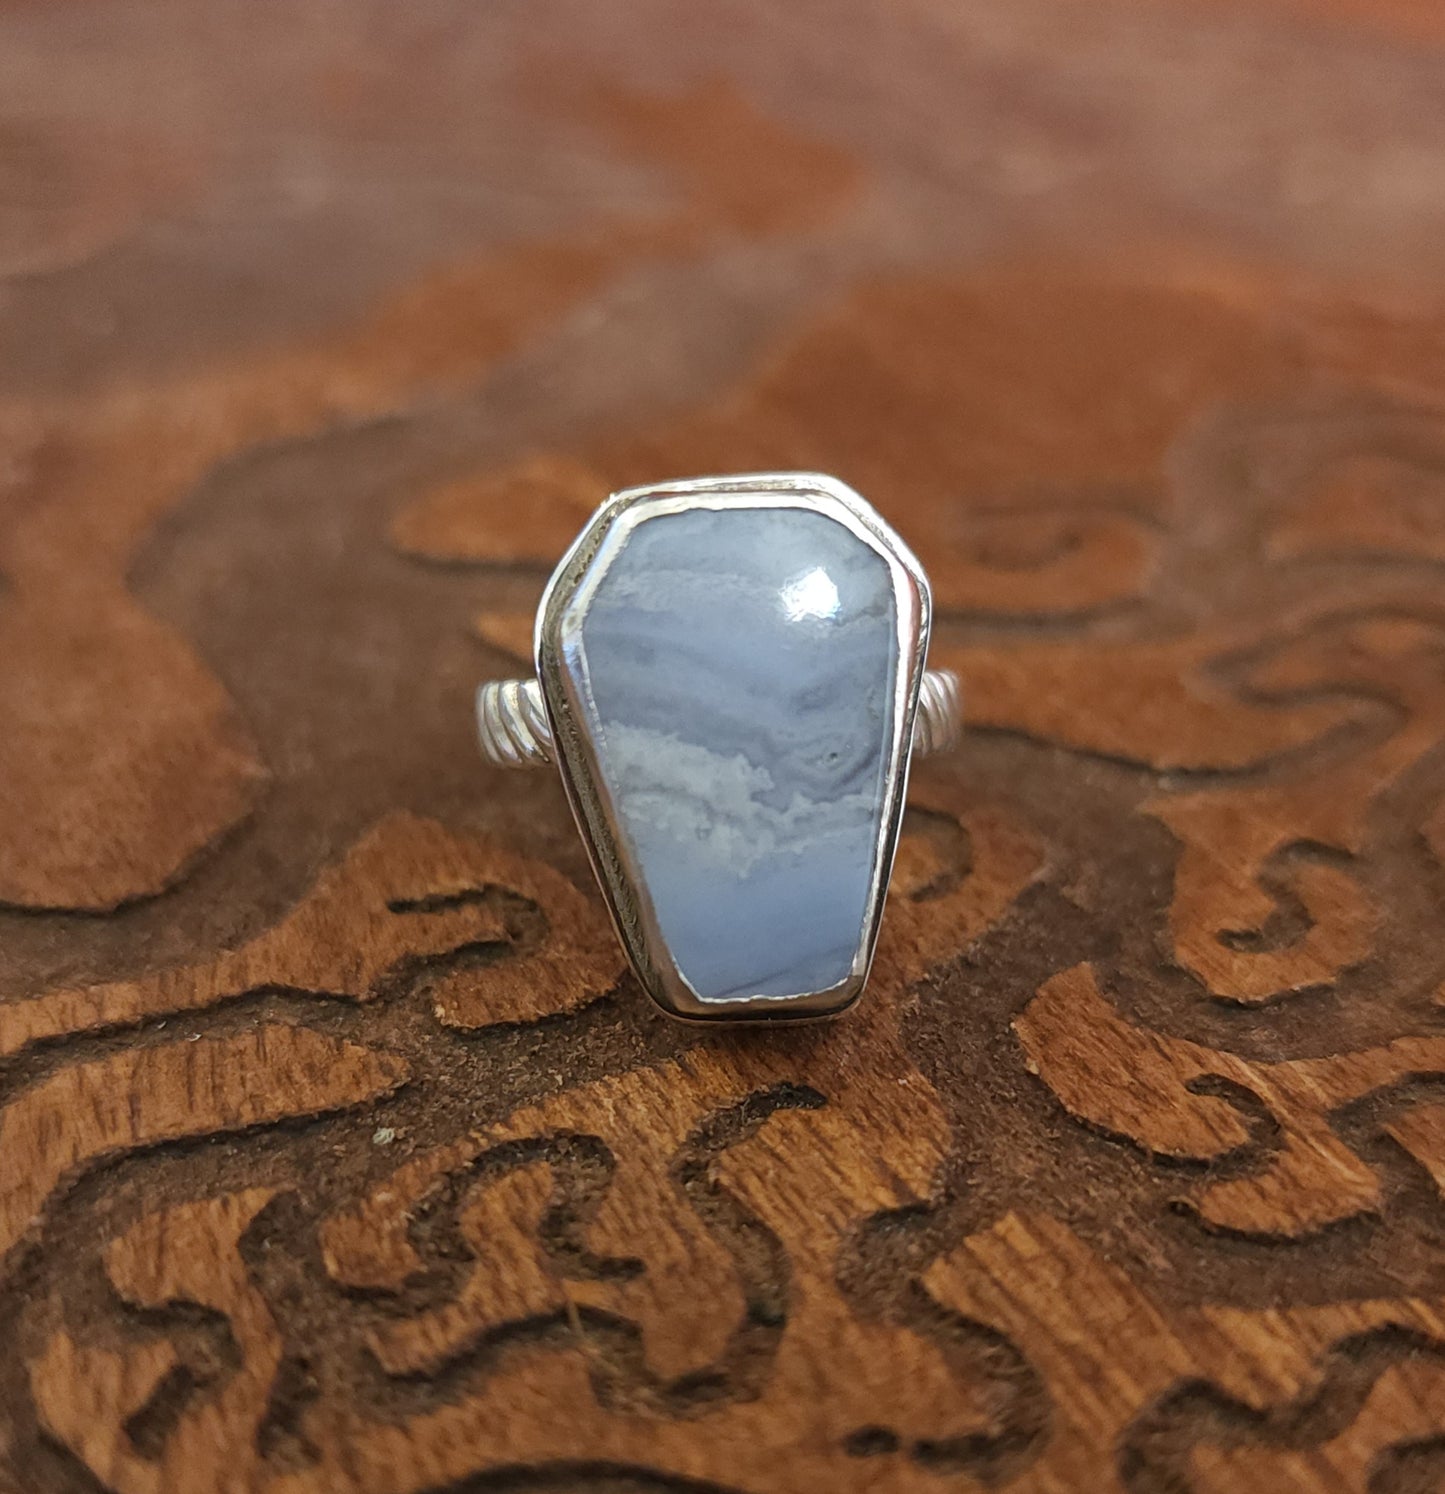 Handcrafted Blue Lace Agate Sterling Silver Ring - Size 7.25